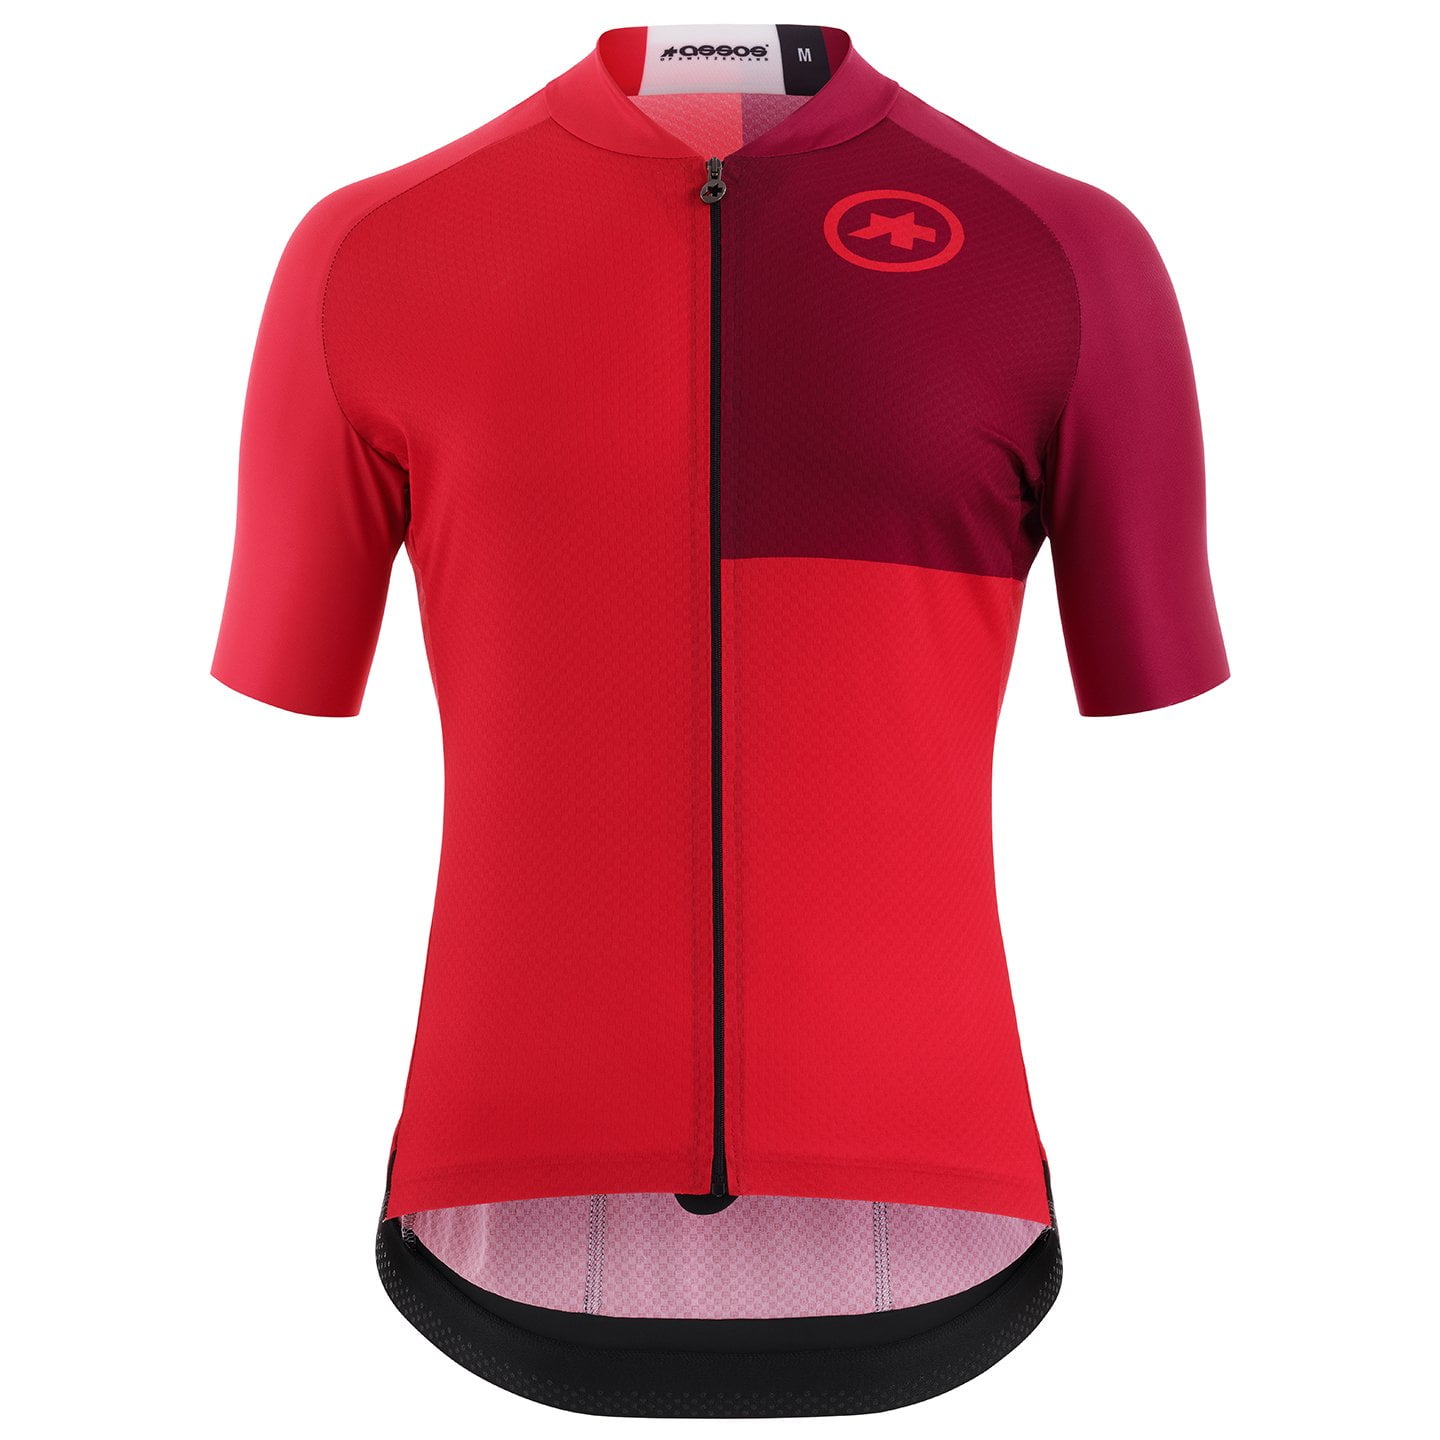 ASSOS Mille GT C2 EVO Stahlstern Short Sleeve Jersey Short Sleeve Jersey, for men, size M, Cycling jersey, Cycling clothing